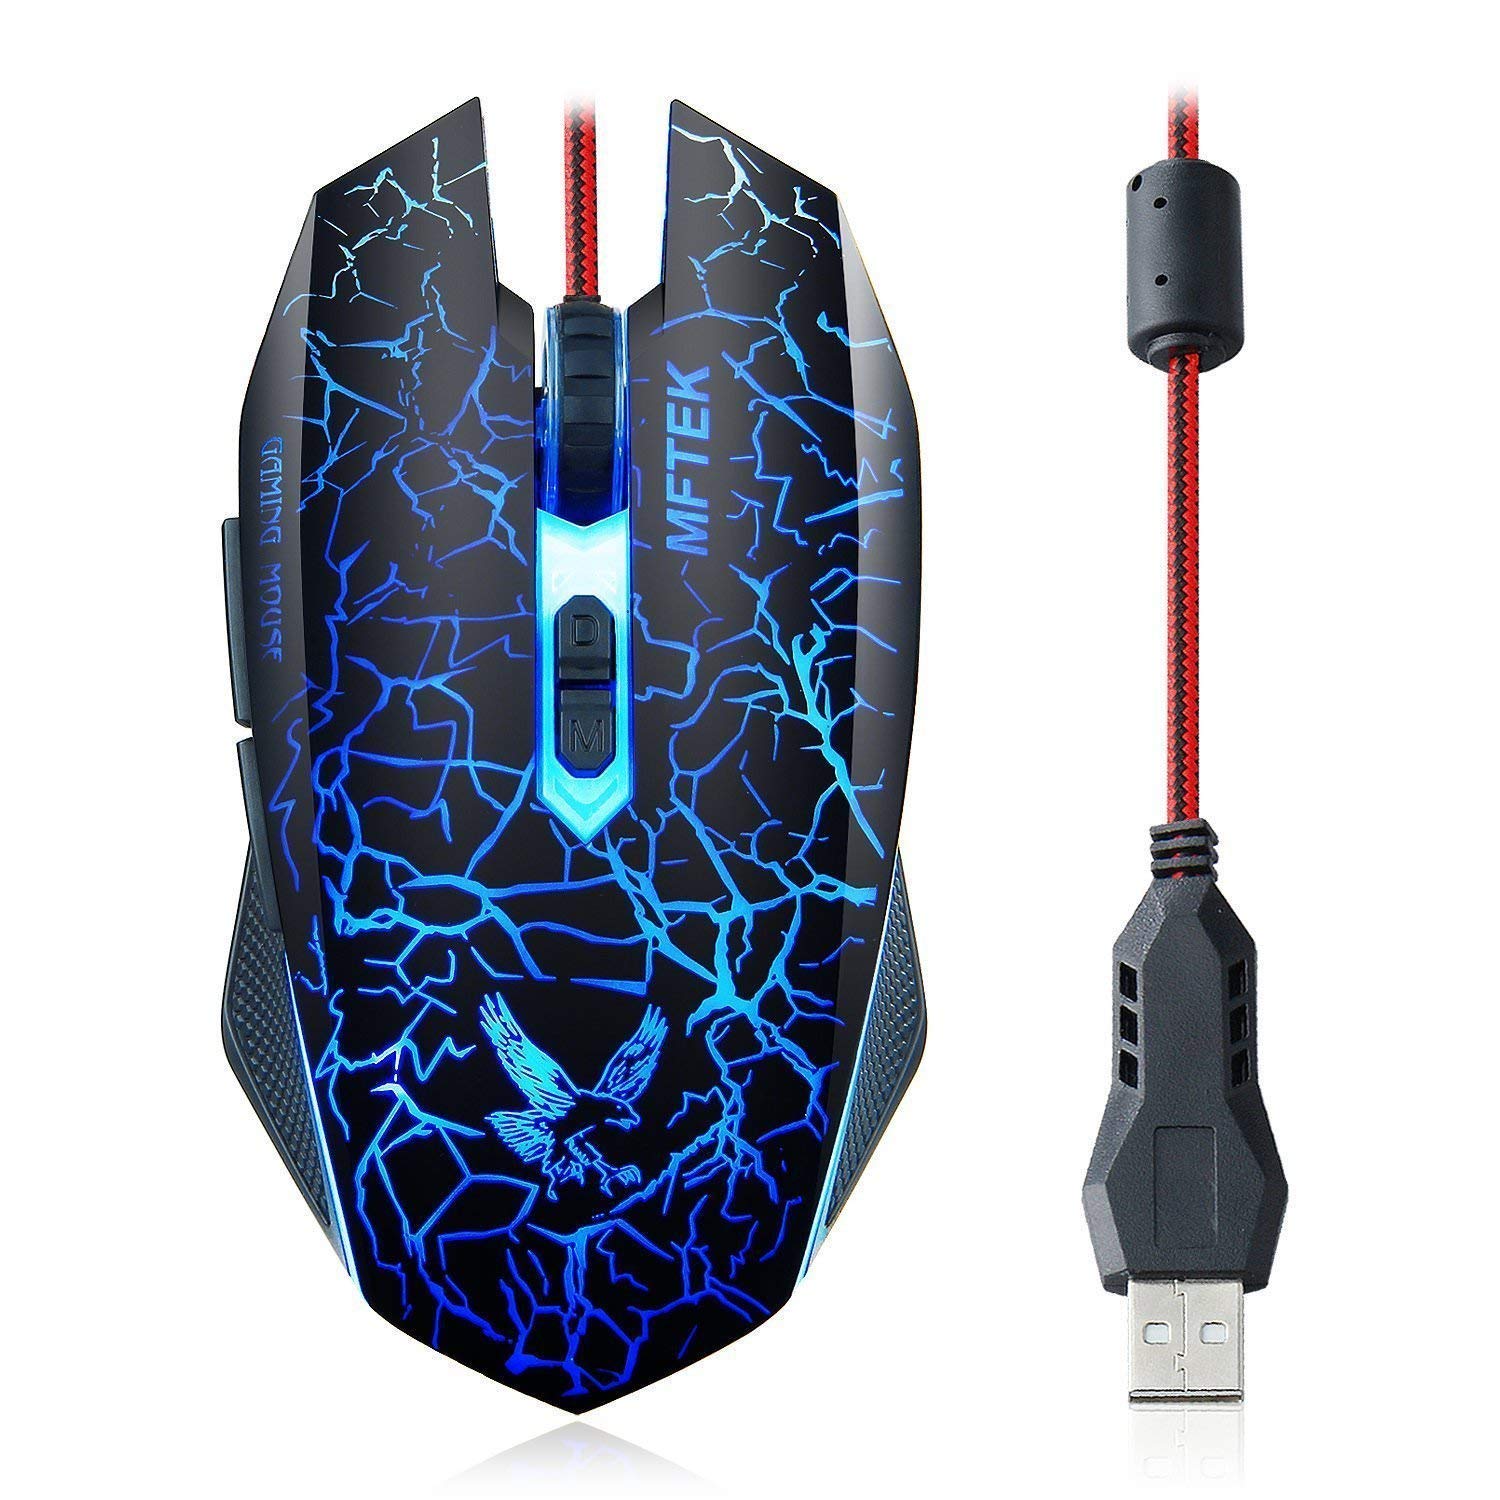 Best Gaming Mouse under 1000 in India